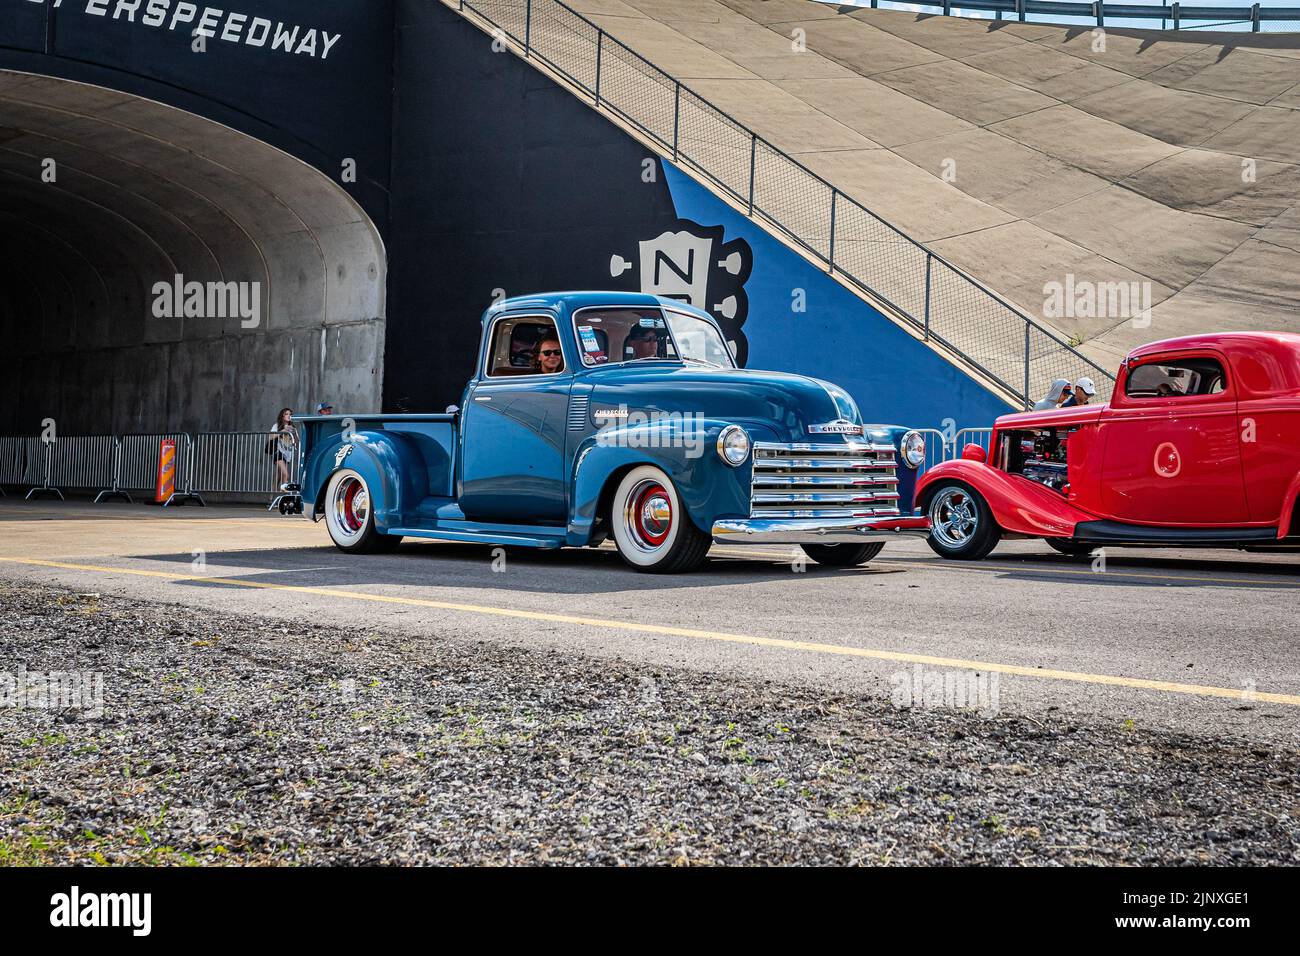 Lebanon, TN - May 14, 2022: Wide angle front corner view of a 1949 Chevrolet Stepside Pickup Truck driving on a road leaving a local car show. Stock Photo